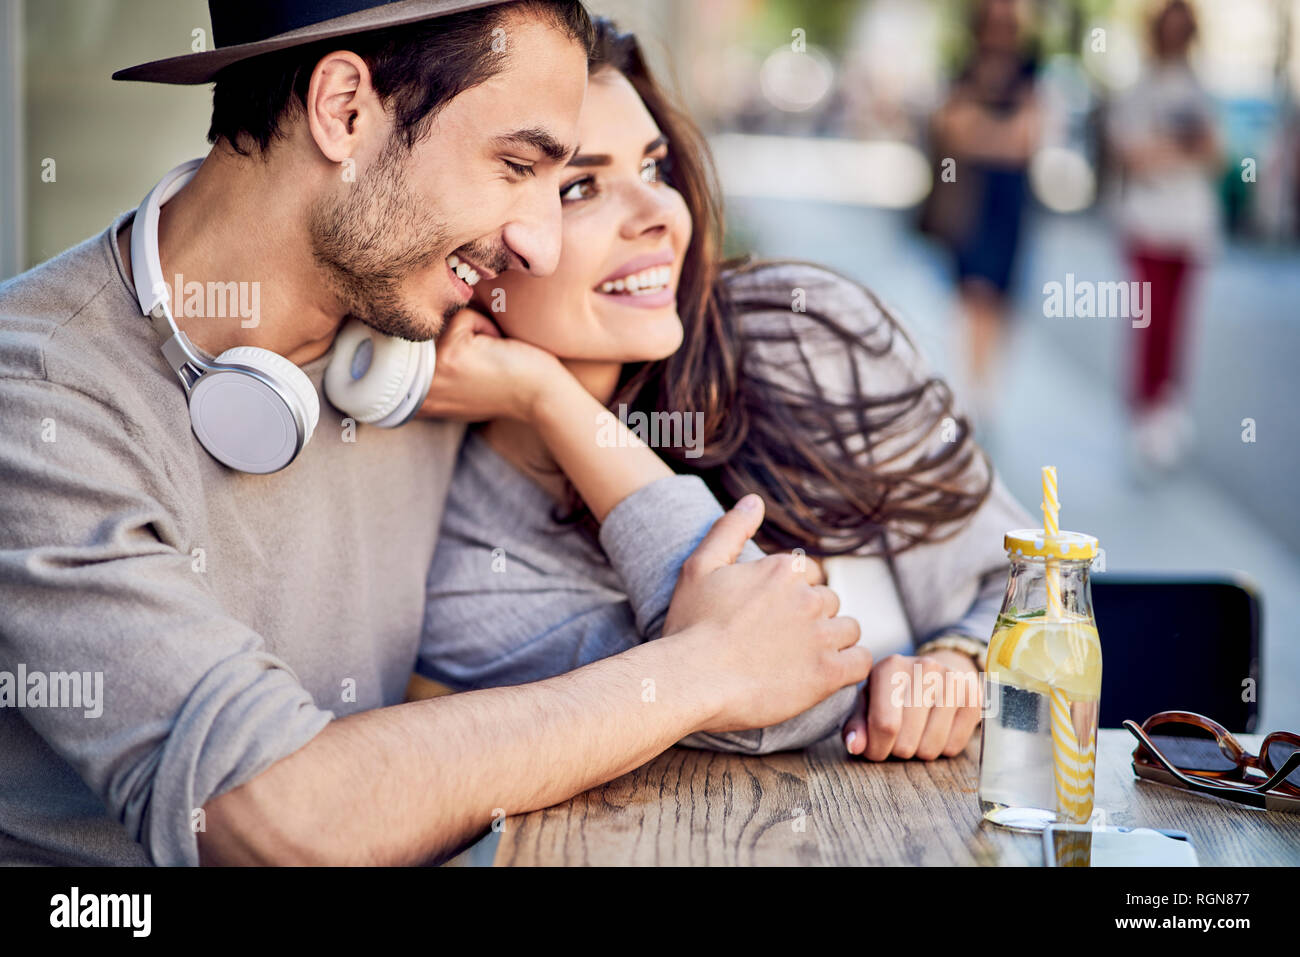 Happy affectionate young couple at outdoors cafe Stock Photo